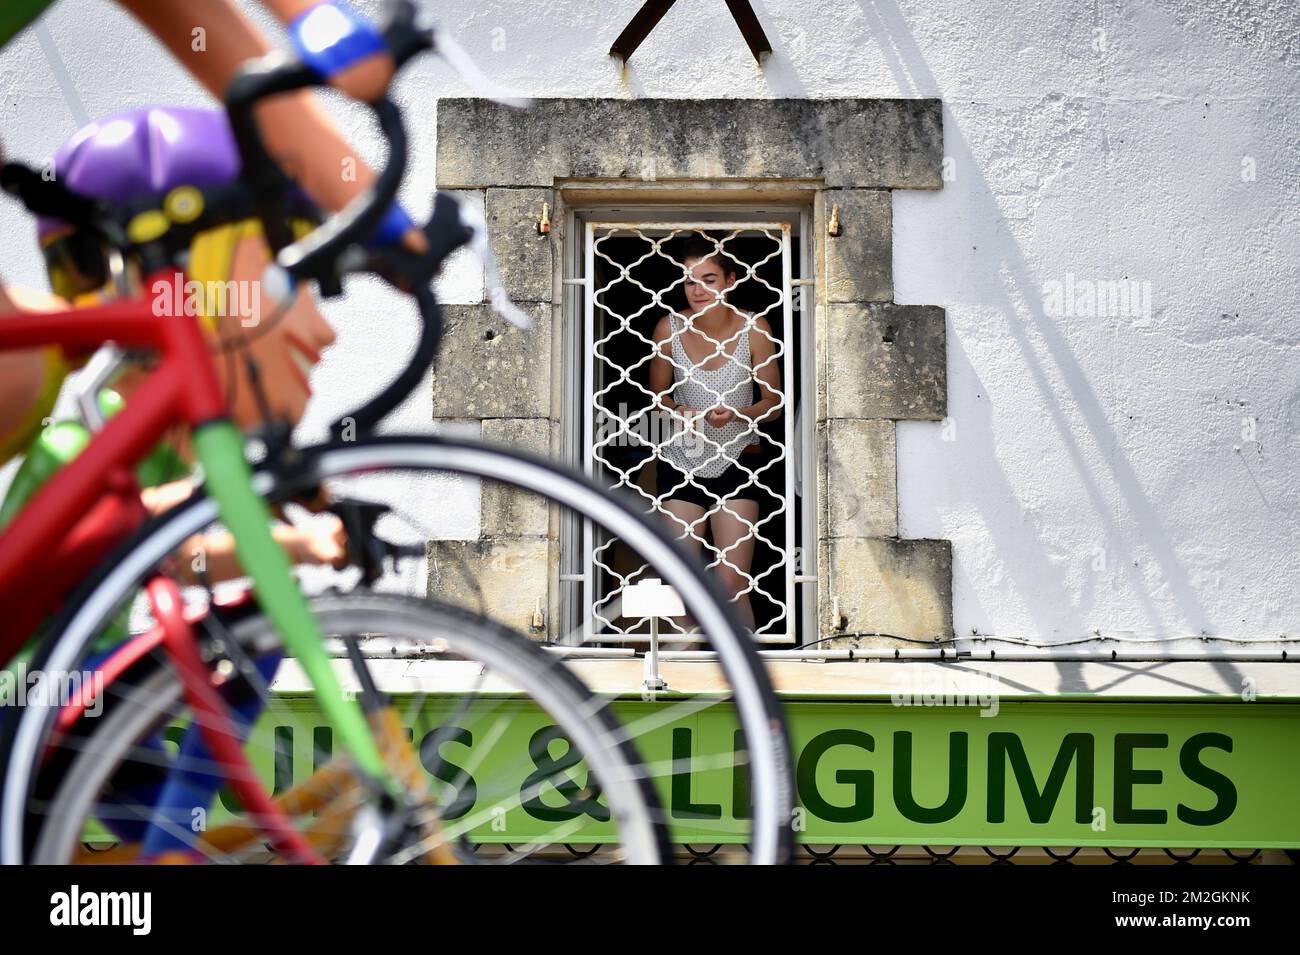 Illustration picture shows a cycling fan during the first stage of the 105th edition of the Tour de France cycling race, 201km from Noirmoutier-en-l'Ile to Fontenay-le-Comte, France, Saturday 07 July 2018. This year's Tour de France takes place from July 7th to July 29th. BELGA PHOTO YORICK JANSENS Stock Photo